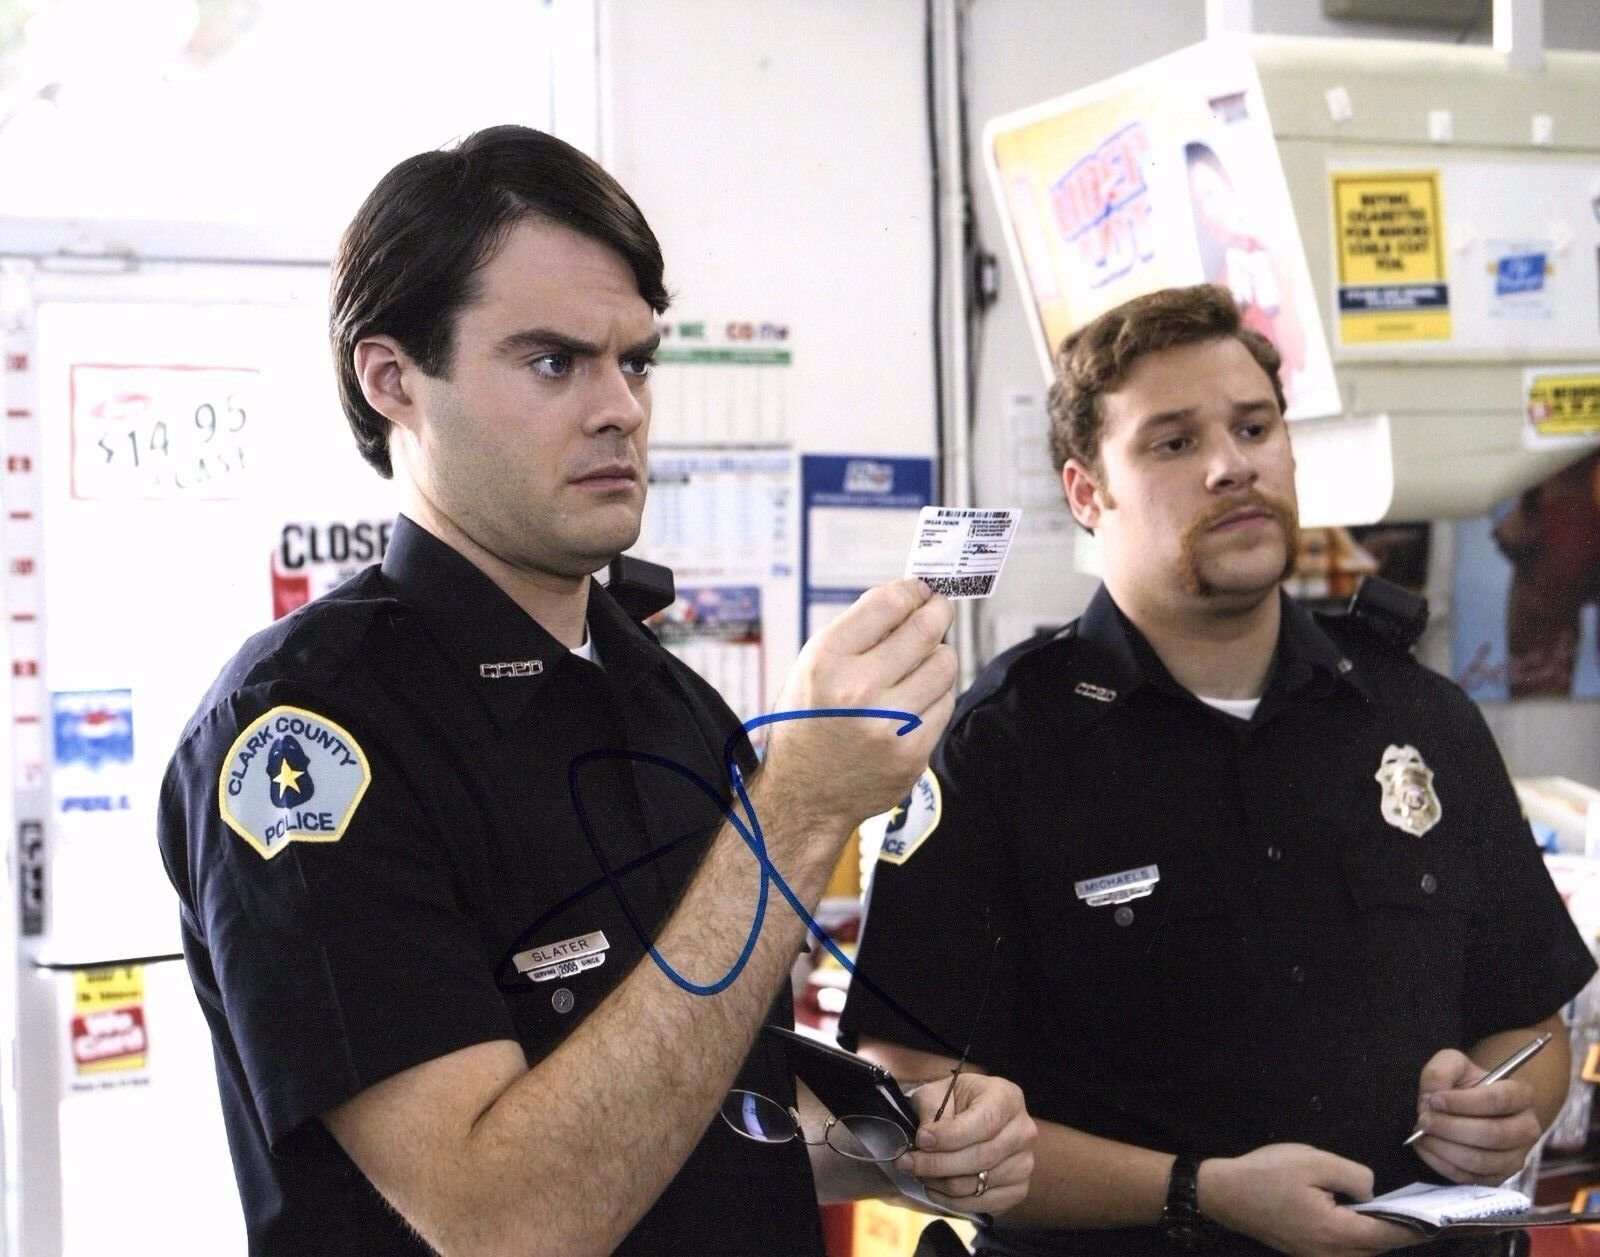 GFA Superbad Officer Michaels * SETH ROGEN * Signed 8x10 Photo Poster painting AD4 COA